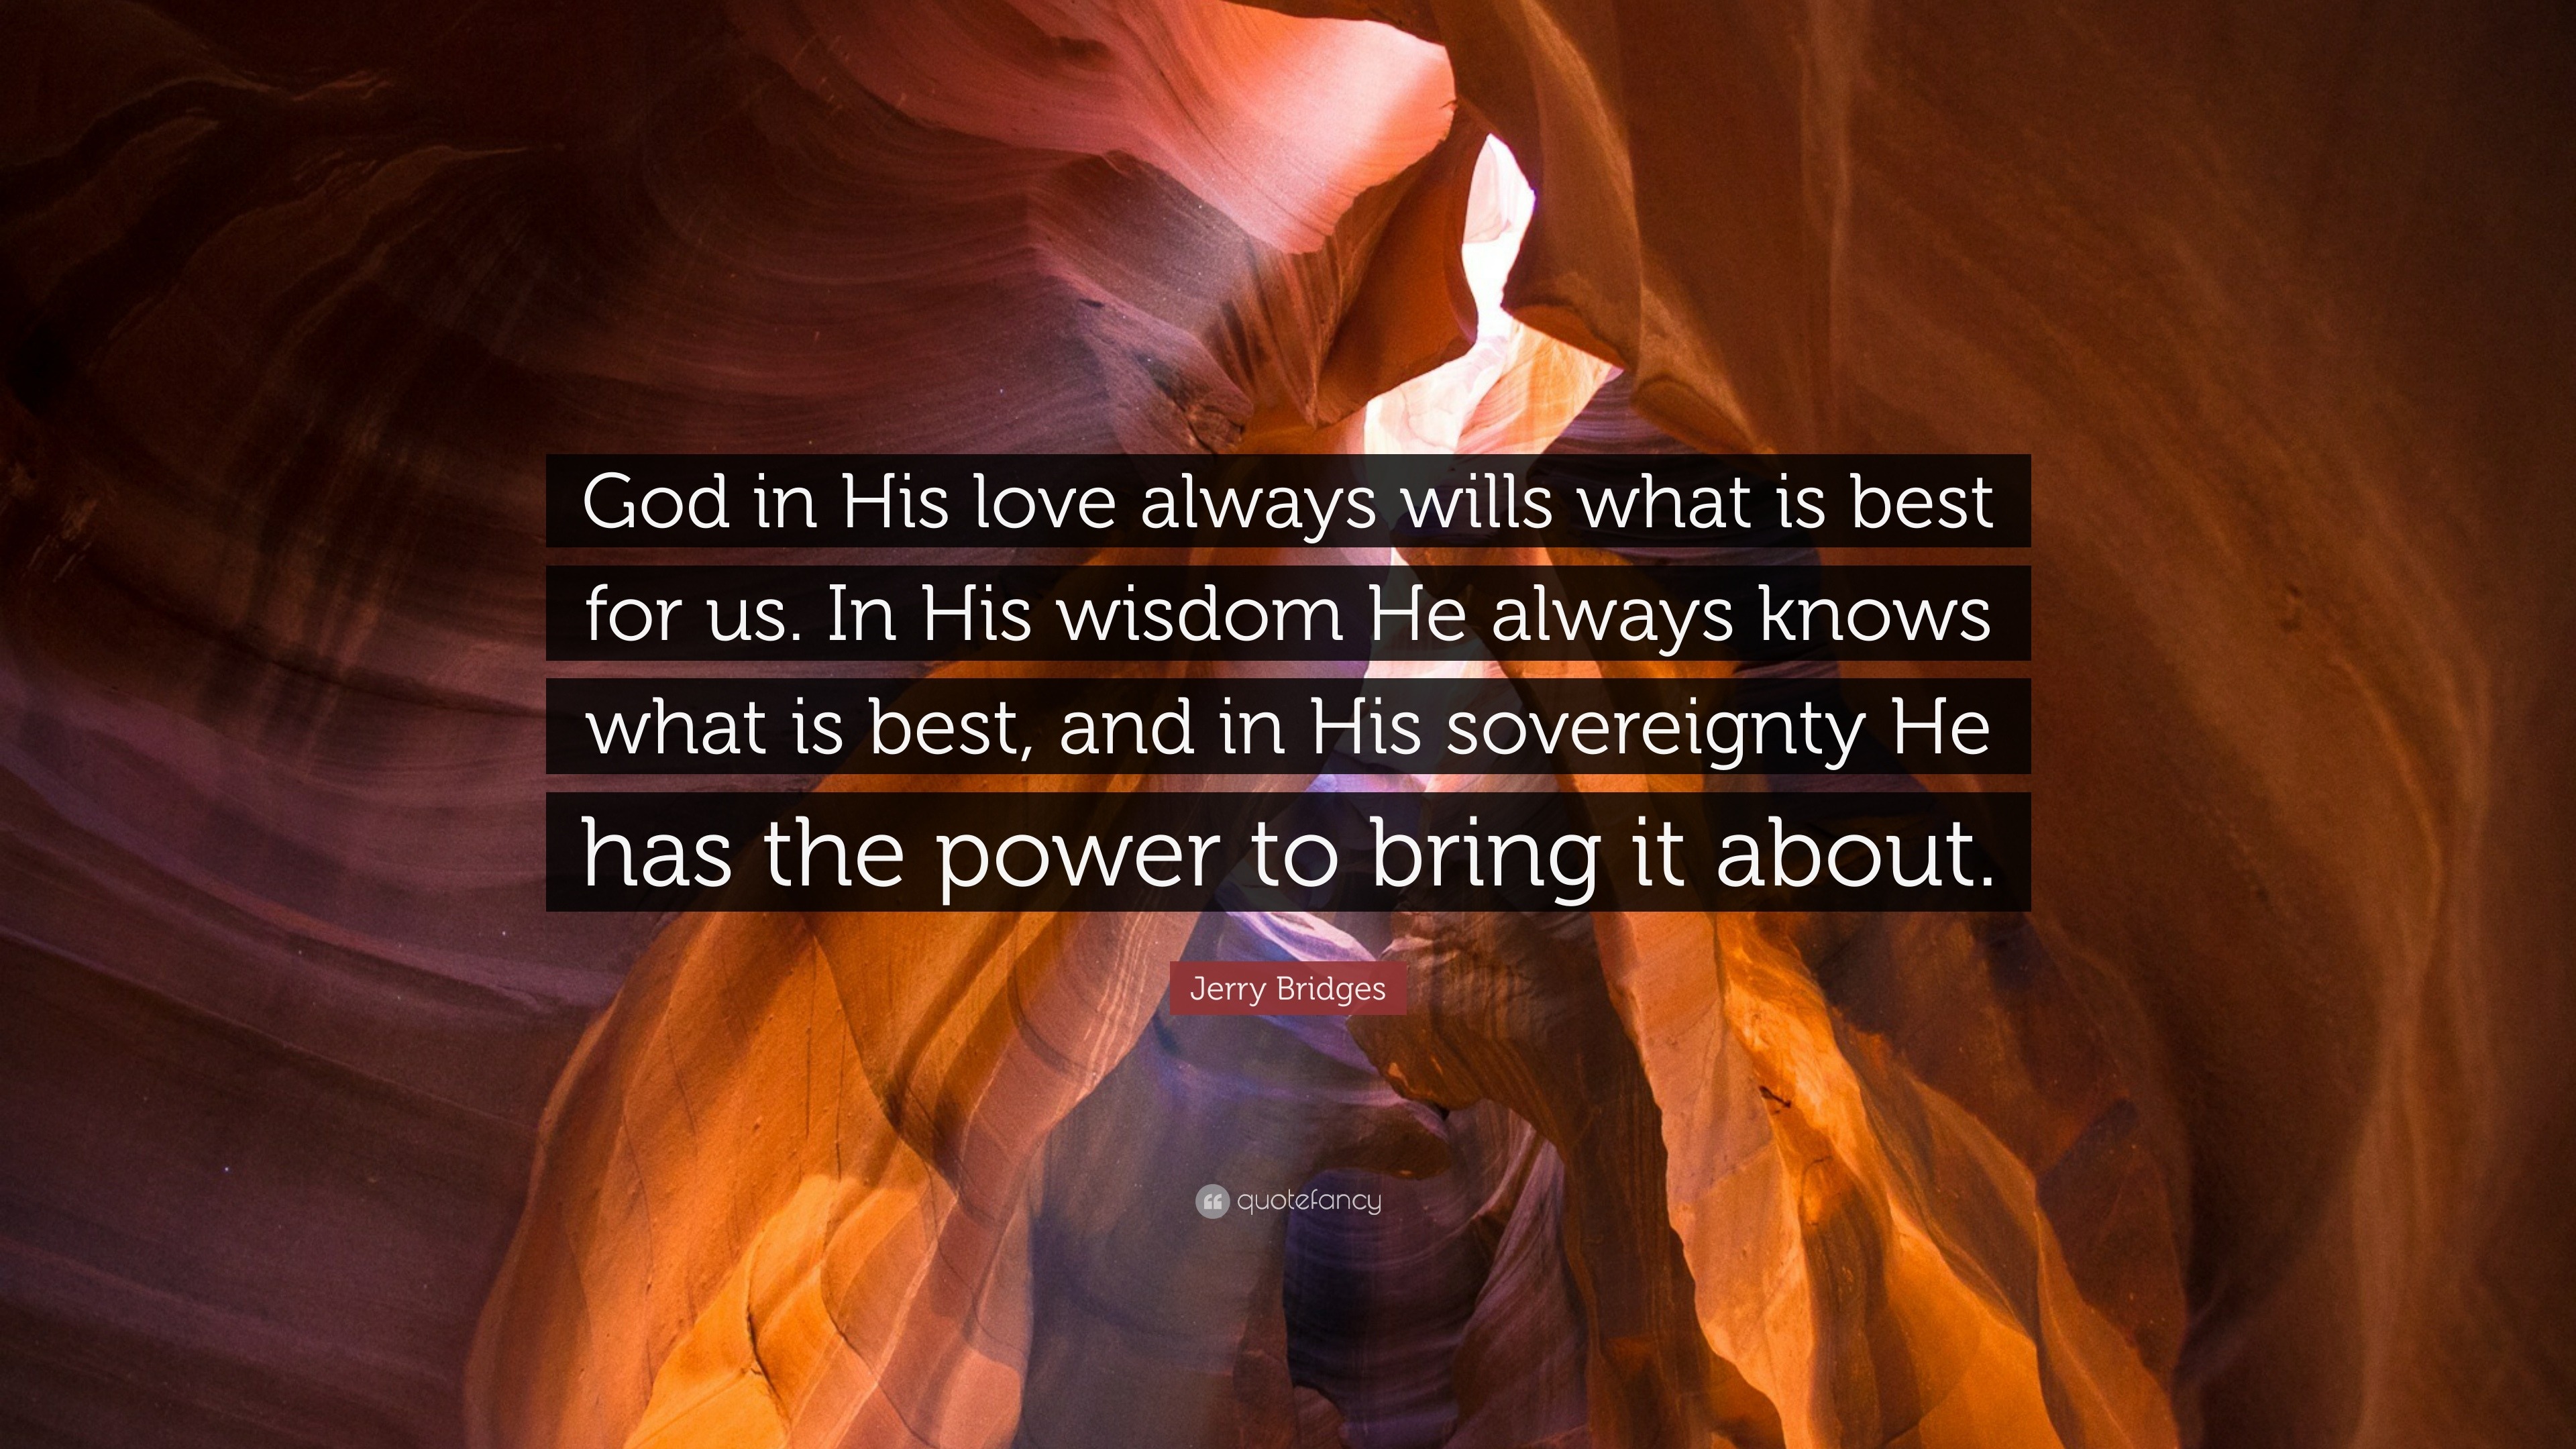 586967-Jerry-Bridges-Quote-God-in-His-love-always-wills-what-is-best-for.jpg